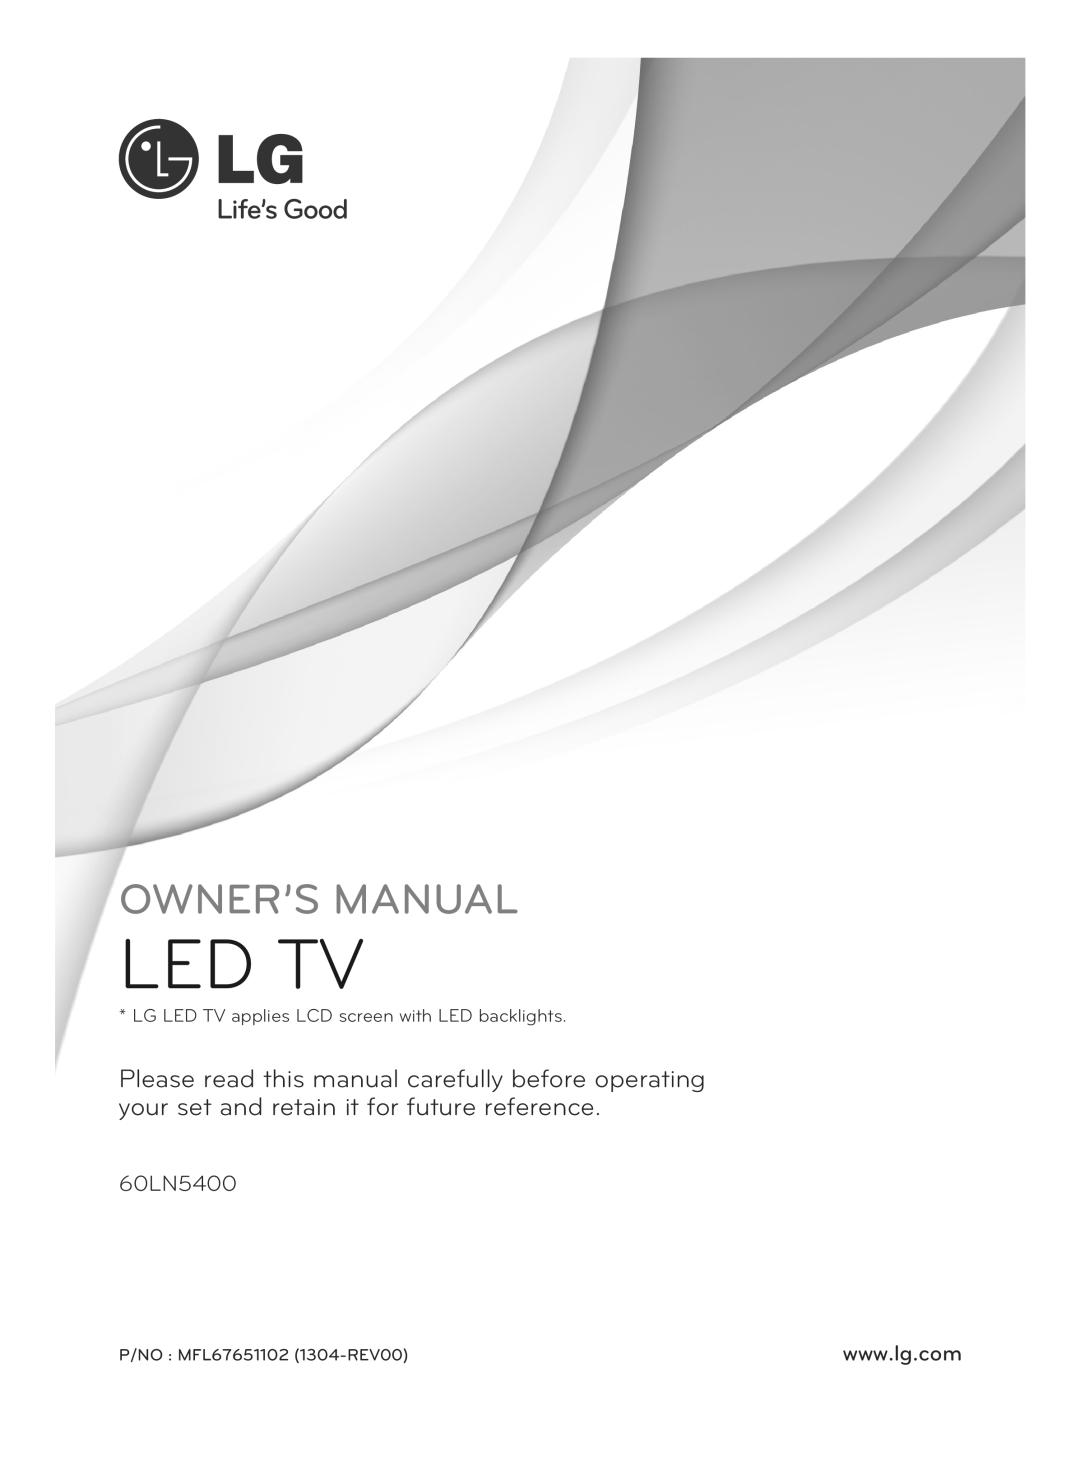 LG Electronics 60LN5400 owner manual Led Tv, Owner’S Manual, LG LED TV applies LCD screen with LED backlights 